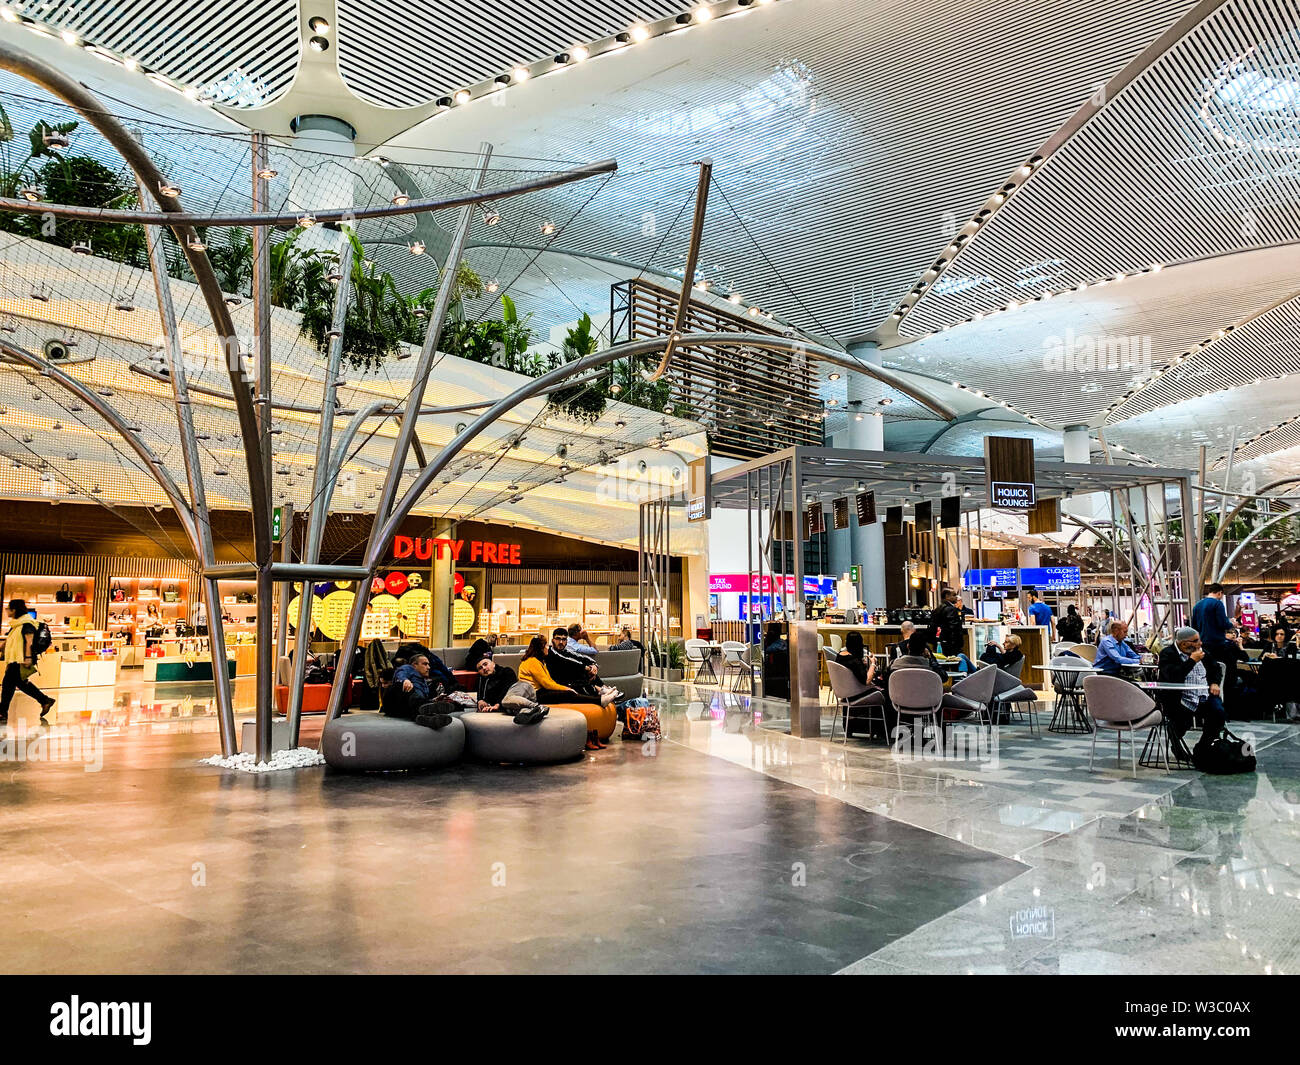 Interior design of the New Airport (IST) that freshly opened and replaces Ataturk International Airport. Istanbul/ Turkey - April 2019. Stock Photo